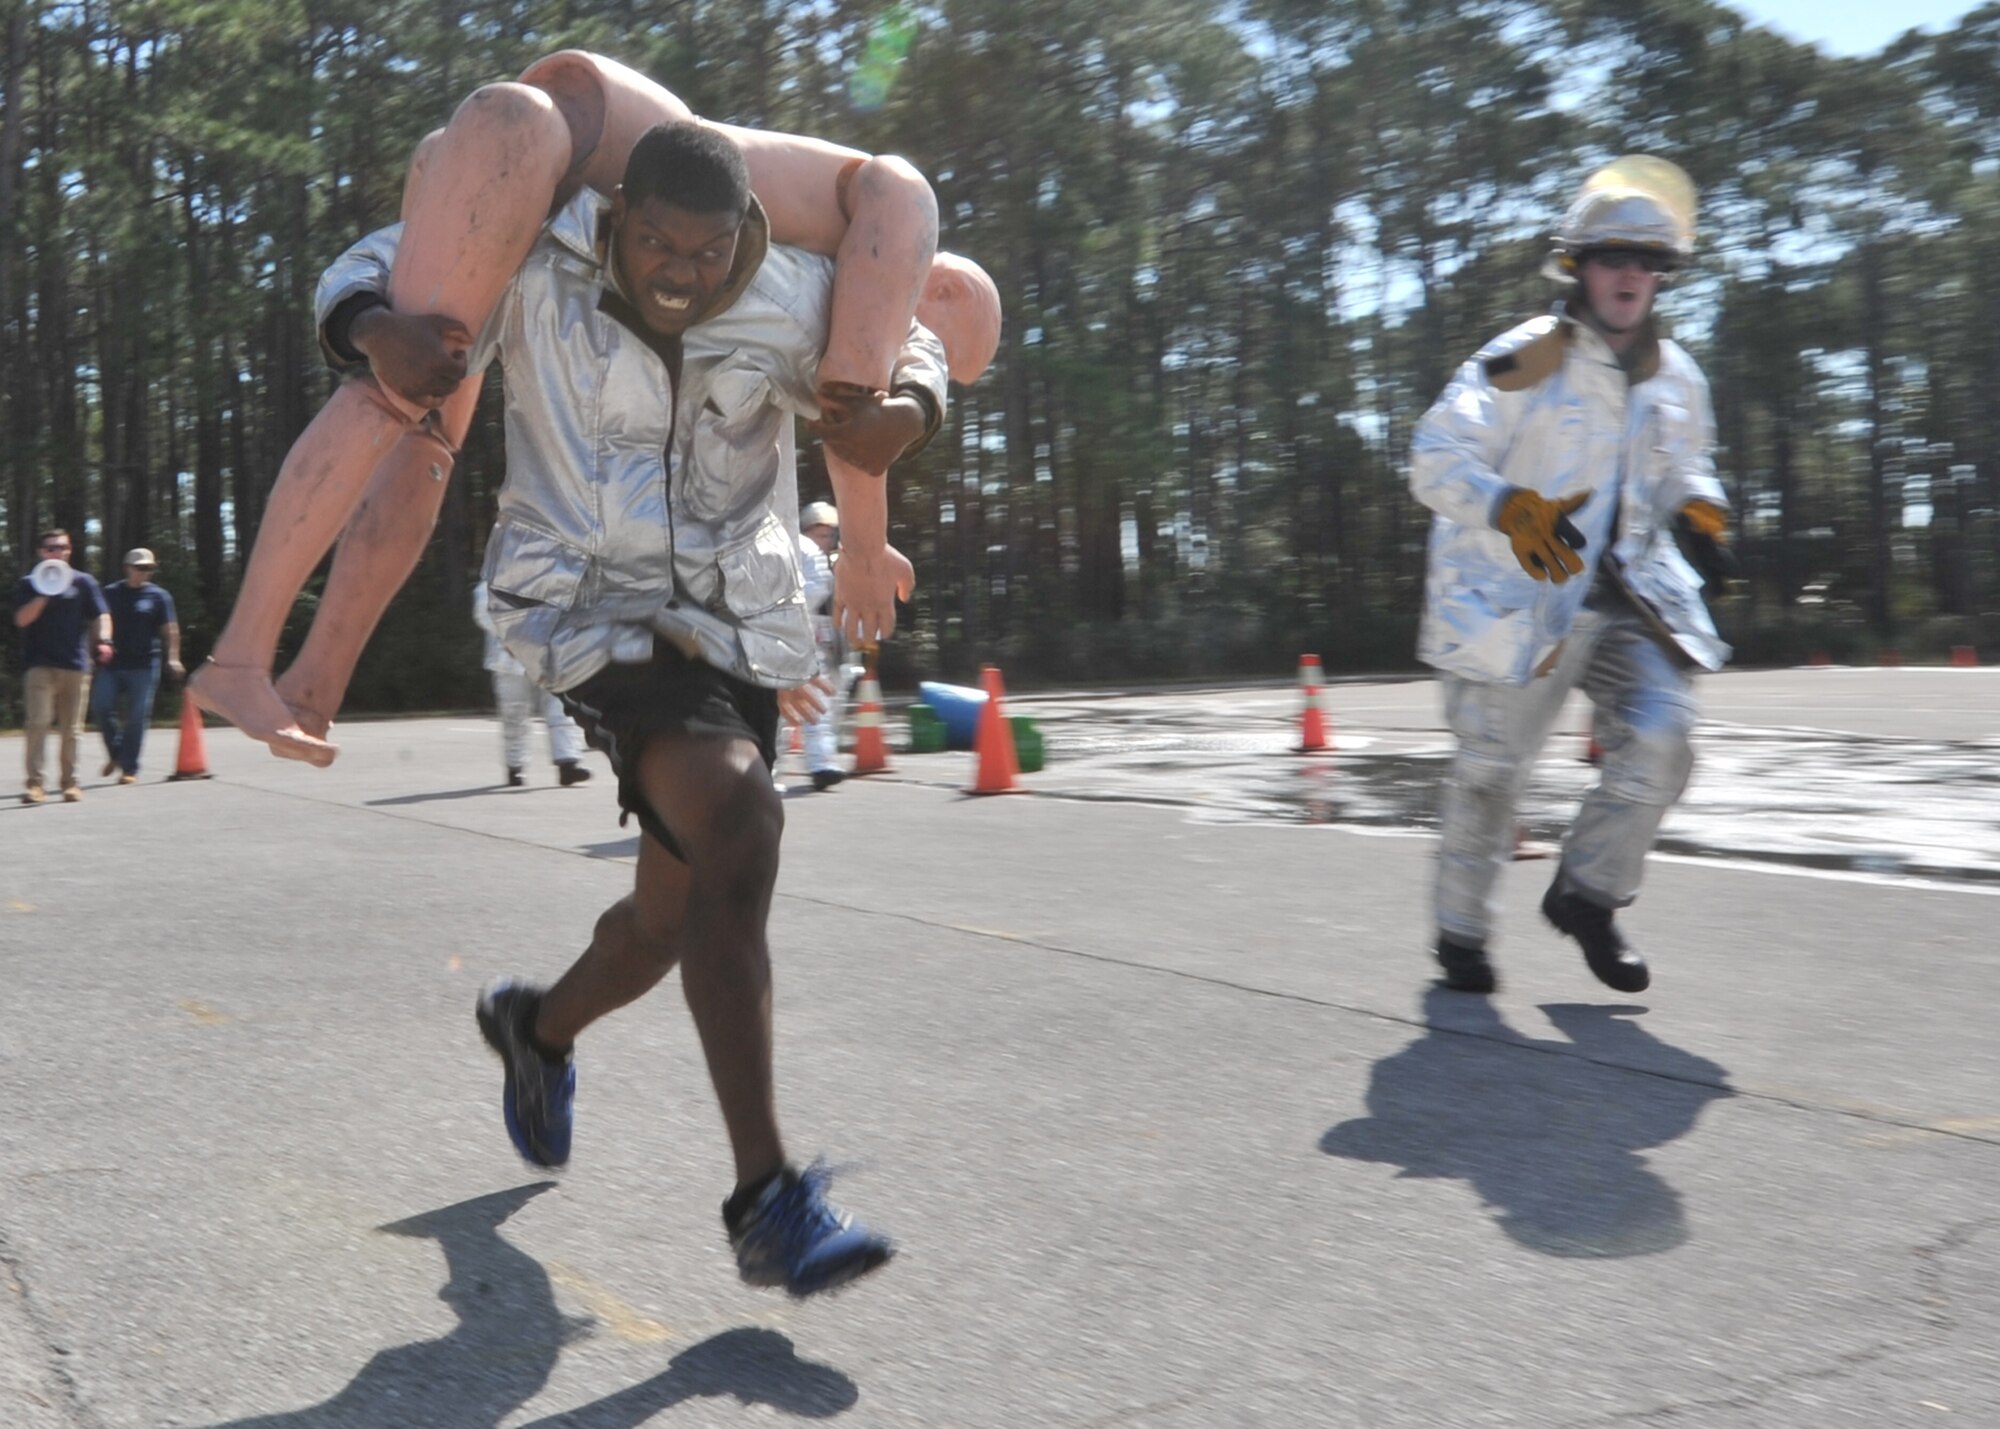 U.S. Air Force Staff Sgt. Antonio Johnson, 325th Security Forces Squadron S-4 mobility NCOIC, carries a training dummy during the Combat Challenge Comprehensive Airman Fitness day on Feb. 3, 2017. Airmen from various different squadrons and members from the Rutherford High School Junior Reserve Officer Training Corps competed in the event which tested their strength, stamina and teamwork skills. (U.S. Air Force photo by Senior Airman Ty-Rico Lea/Released)